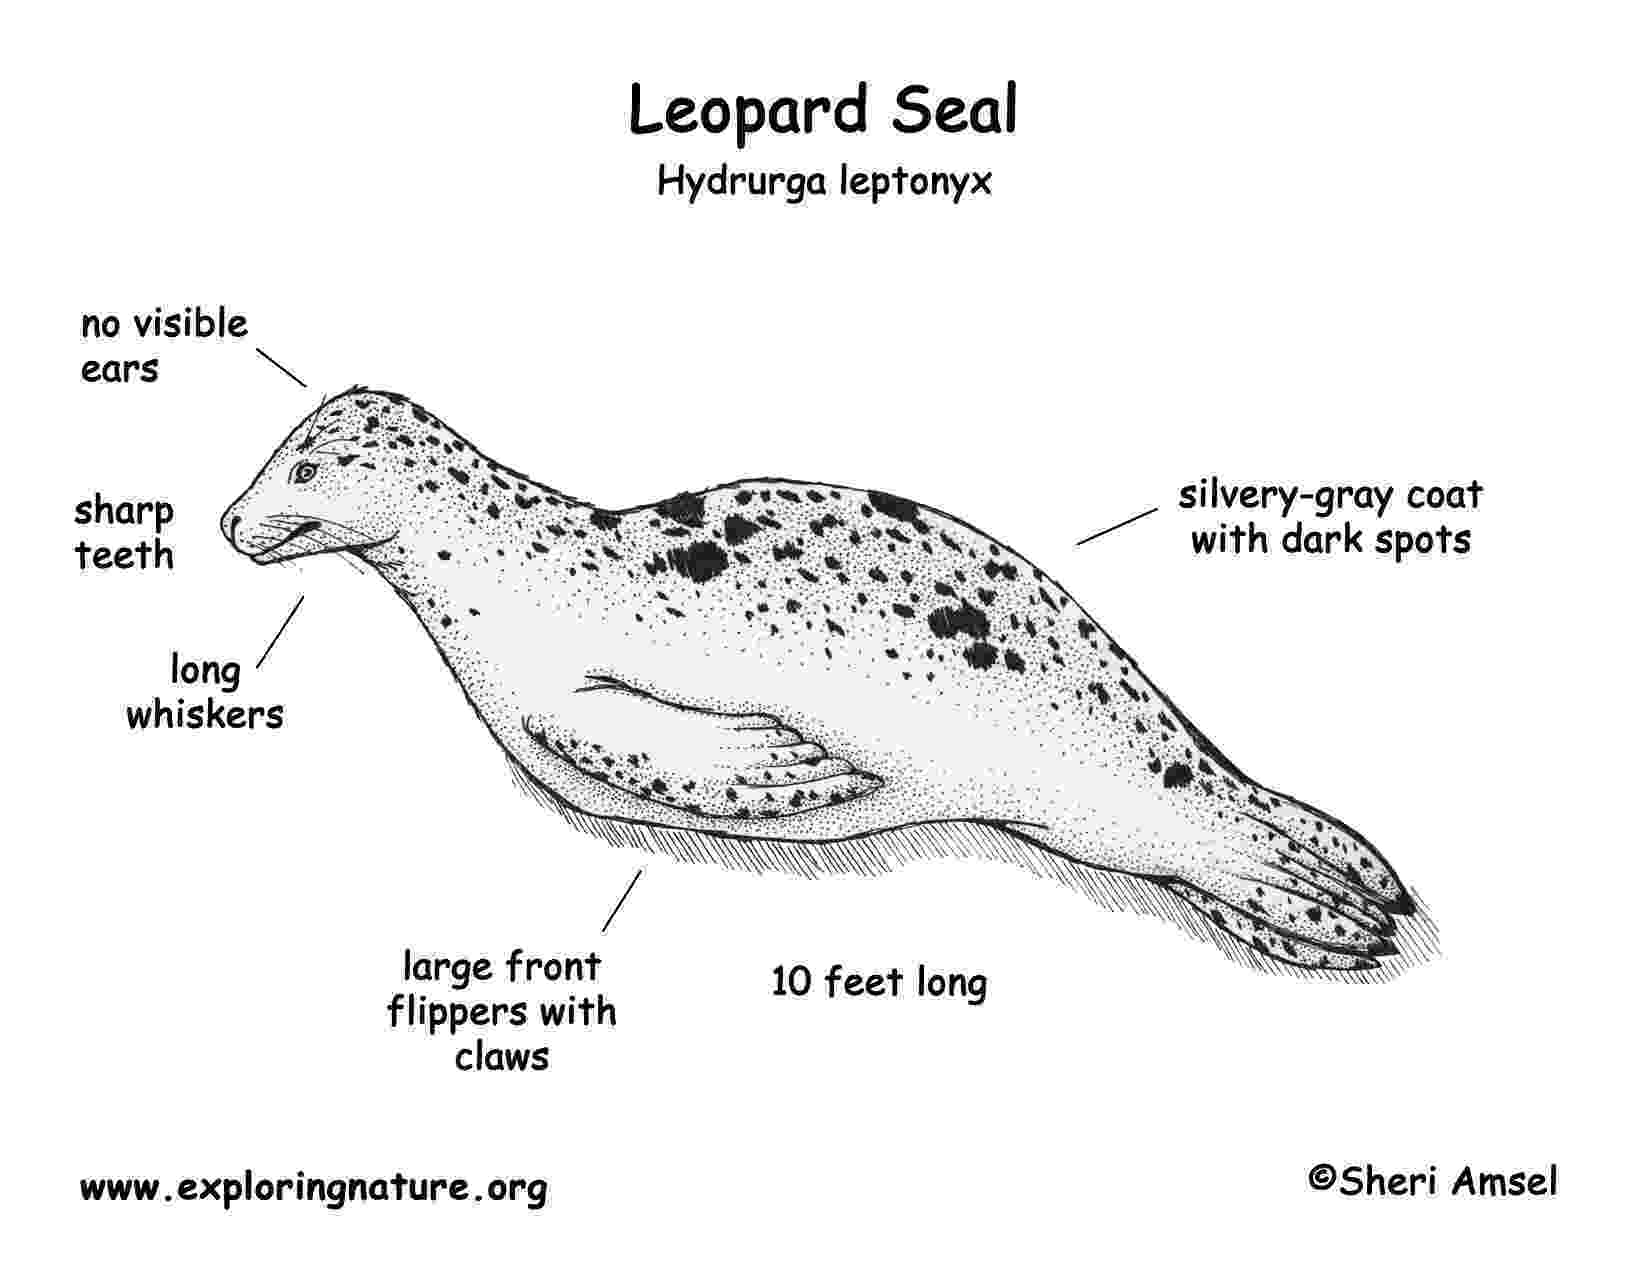 leopard seal coloring pages leopard seal coloring page getcoloringpagescom leopard seal coloring pages 